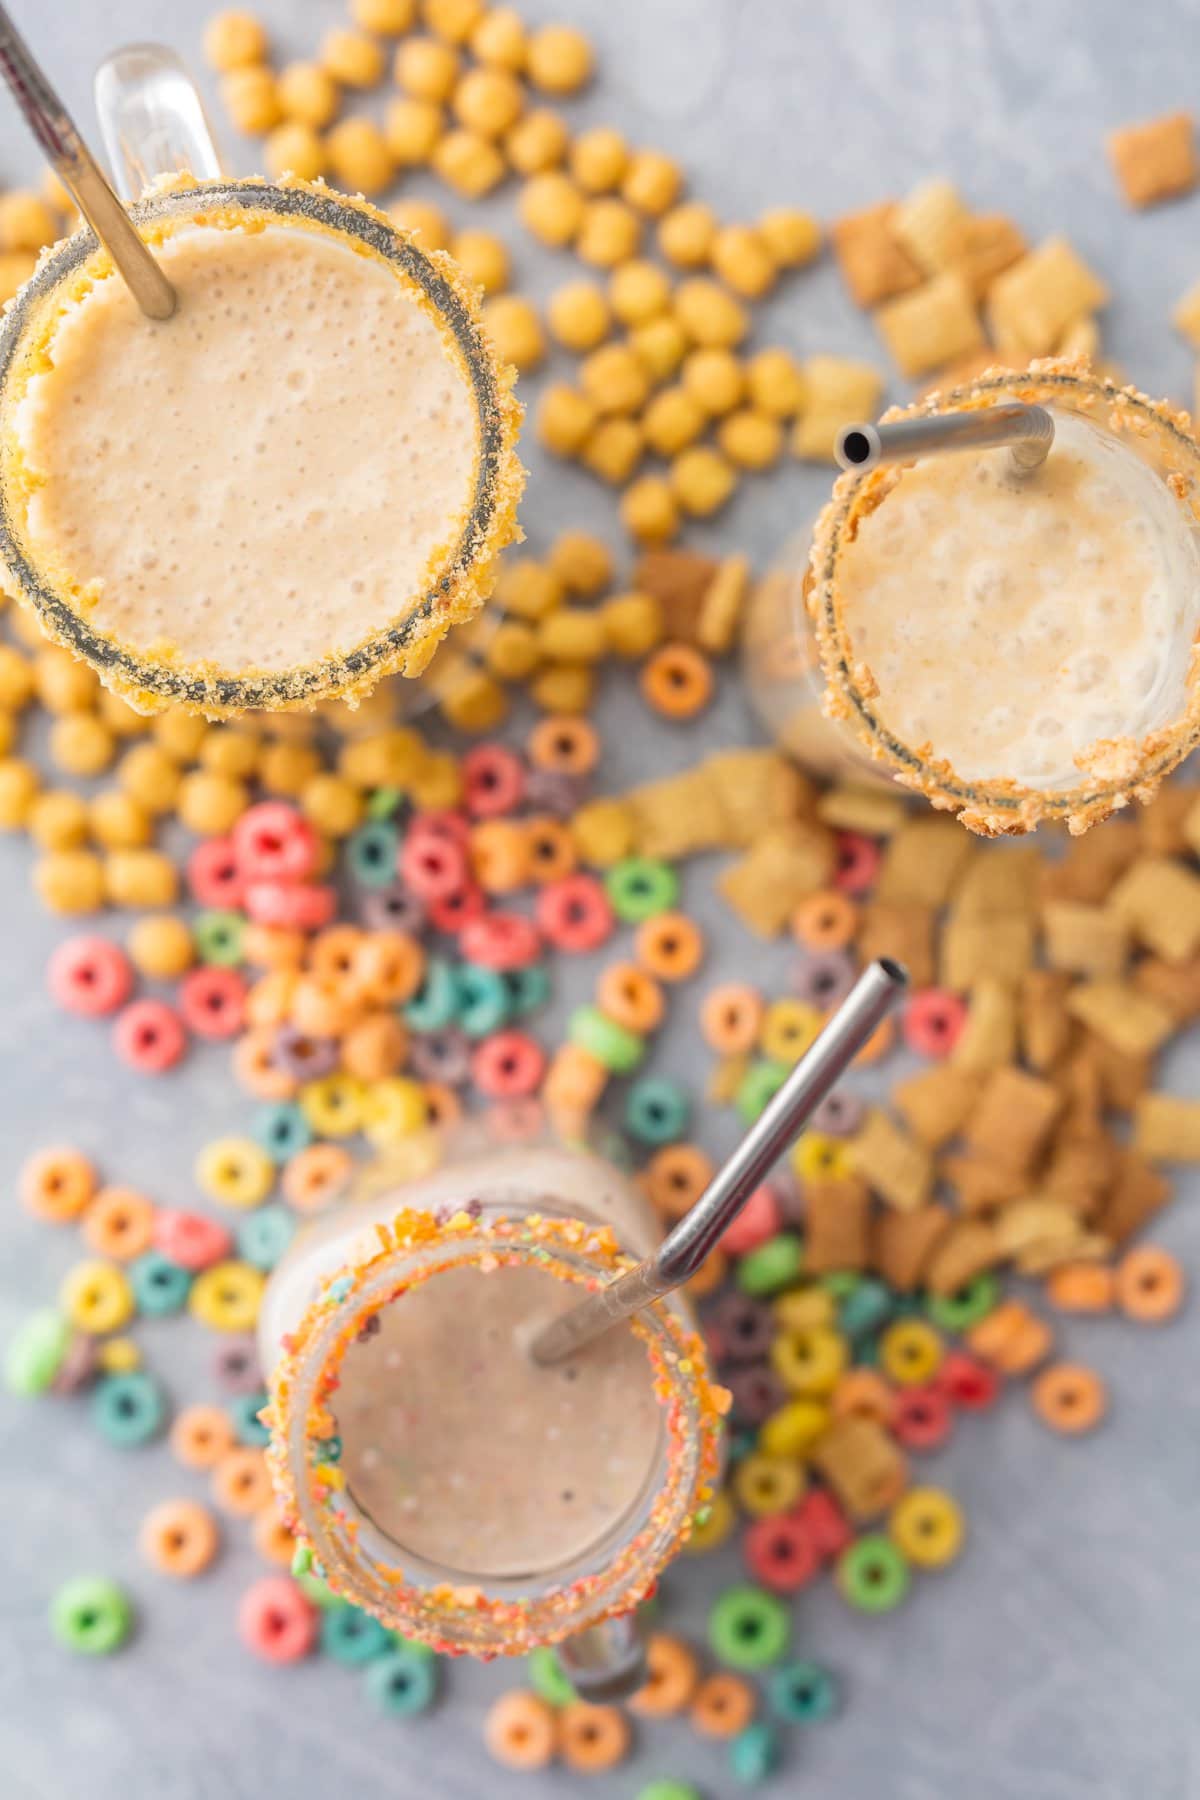 Breakfast Cereal Smoothie (3 Ways!) is a fun, healthy, and easy breakfast the entire family with love! Blend your favorite cereal with milk, bananas, and ice and you're in business! Customizable for any flavor. SO FUN!